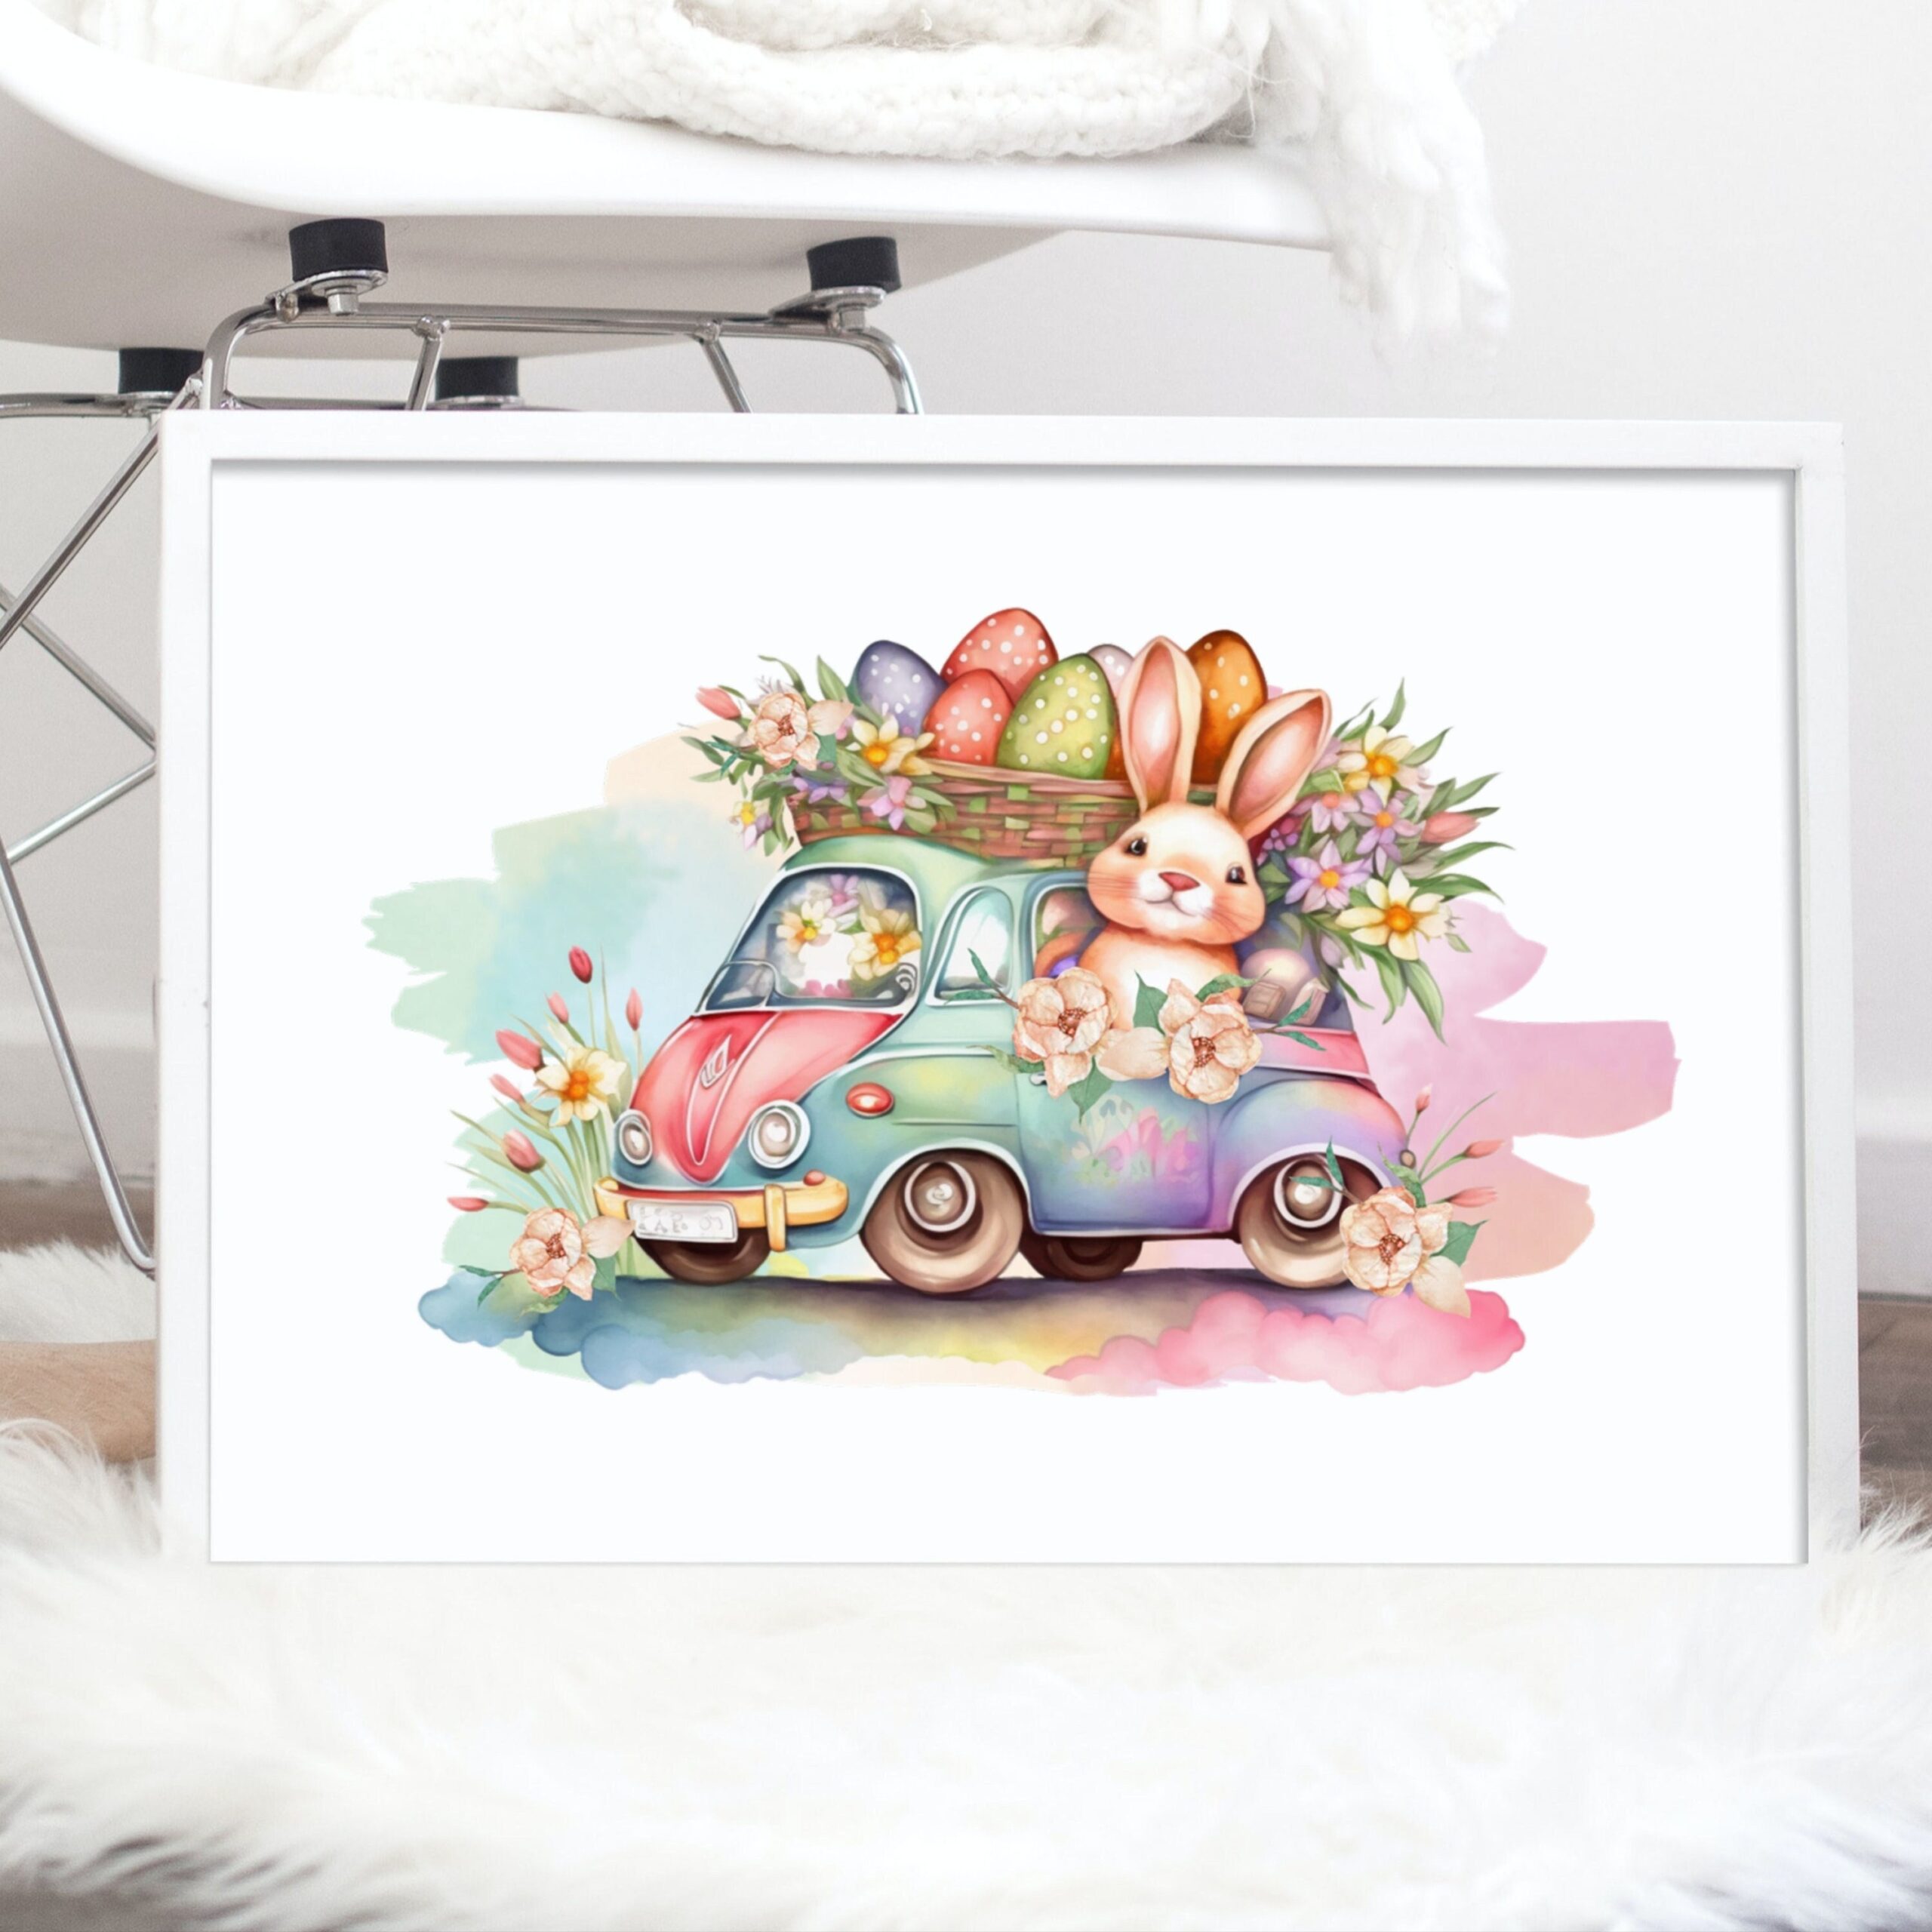 Transparent Watercolor PNG for Sublimation, Cute Easter Bunny, Floral Car, Colorfull Eggs, Watercolor Easter Car Floral Bunny. Template PNG